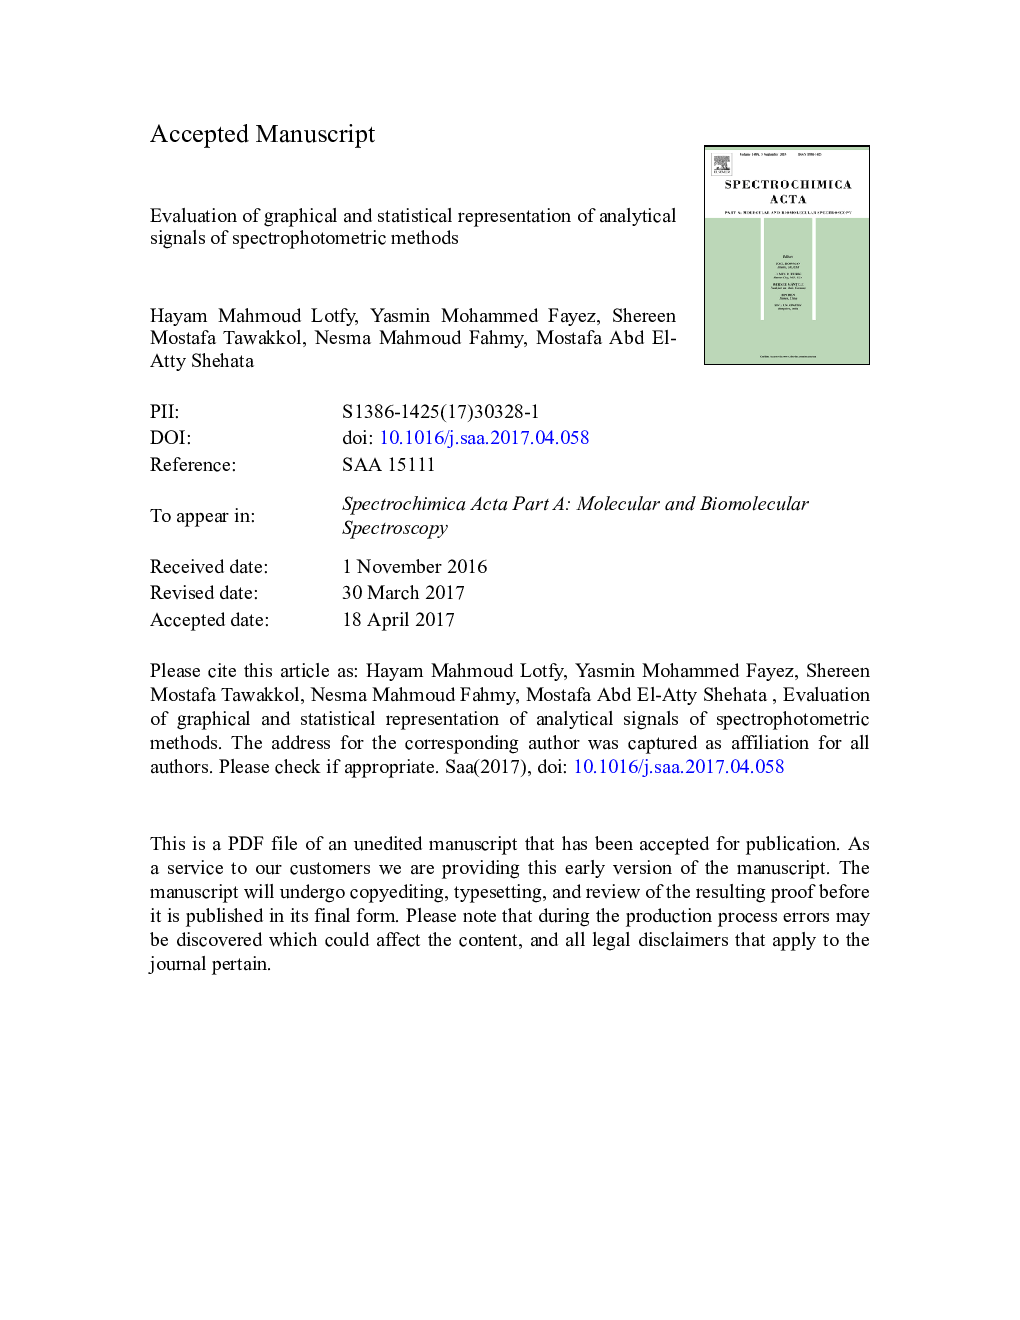 Evaluation of graphical and statistical representation of analytical signals of spectrophotometric methods